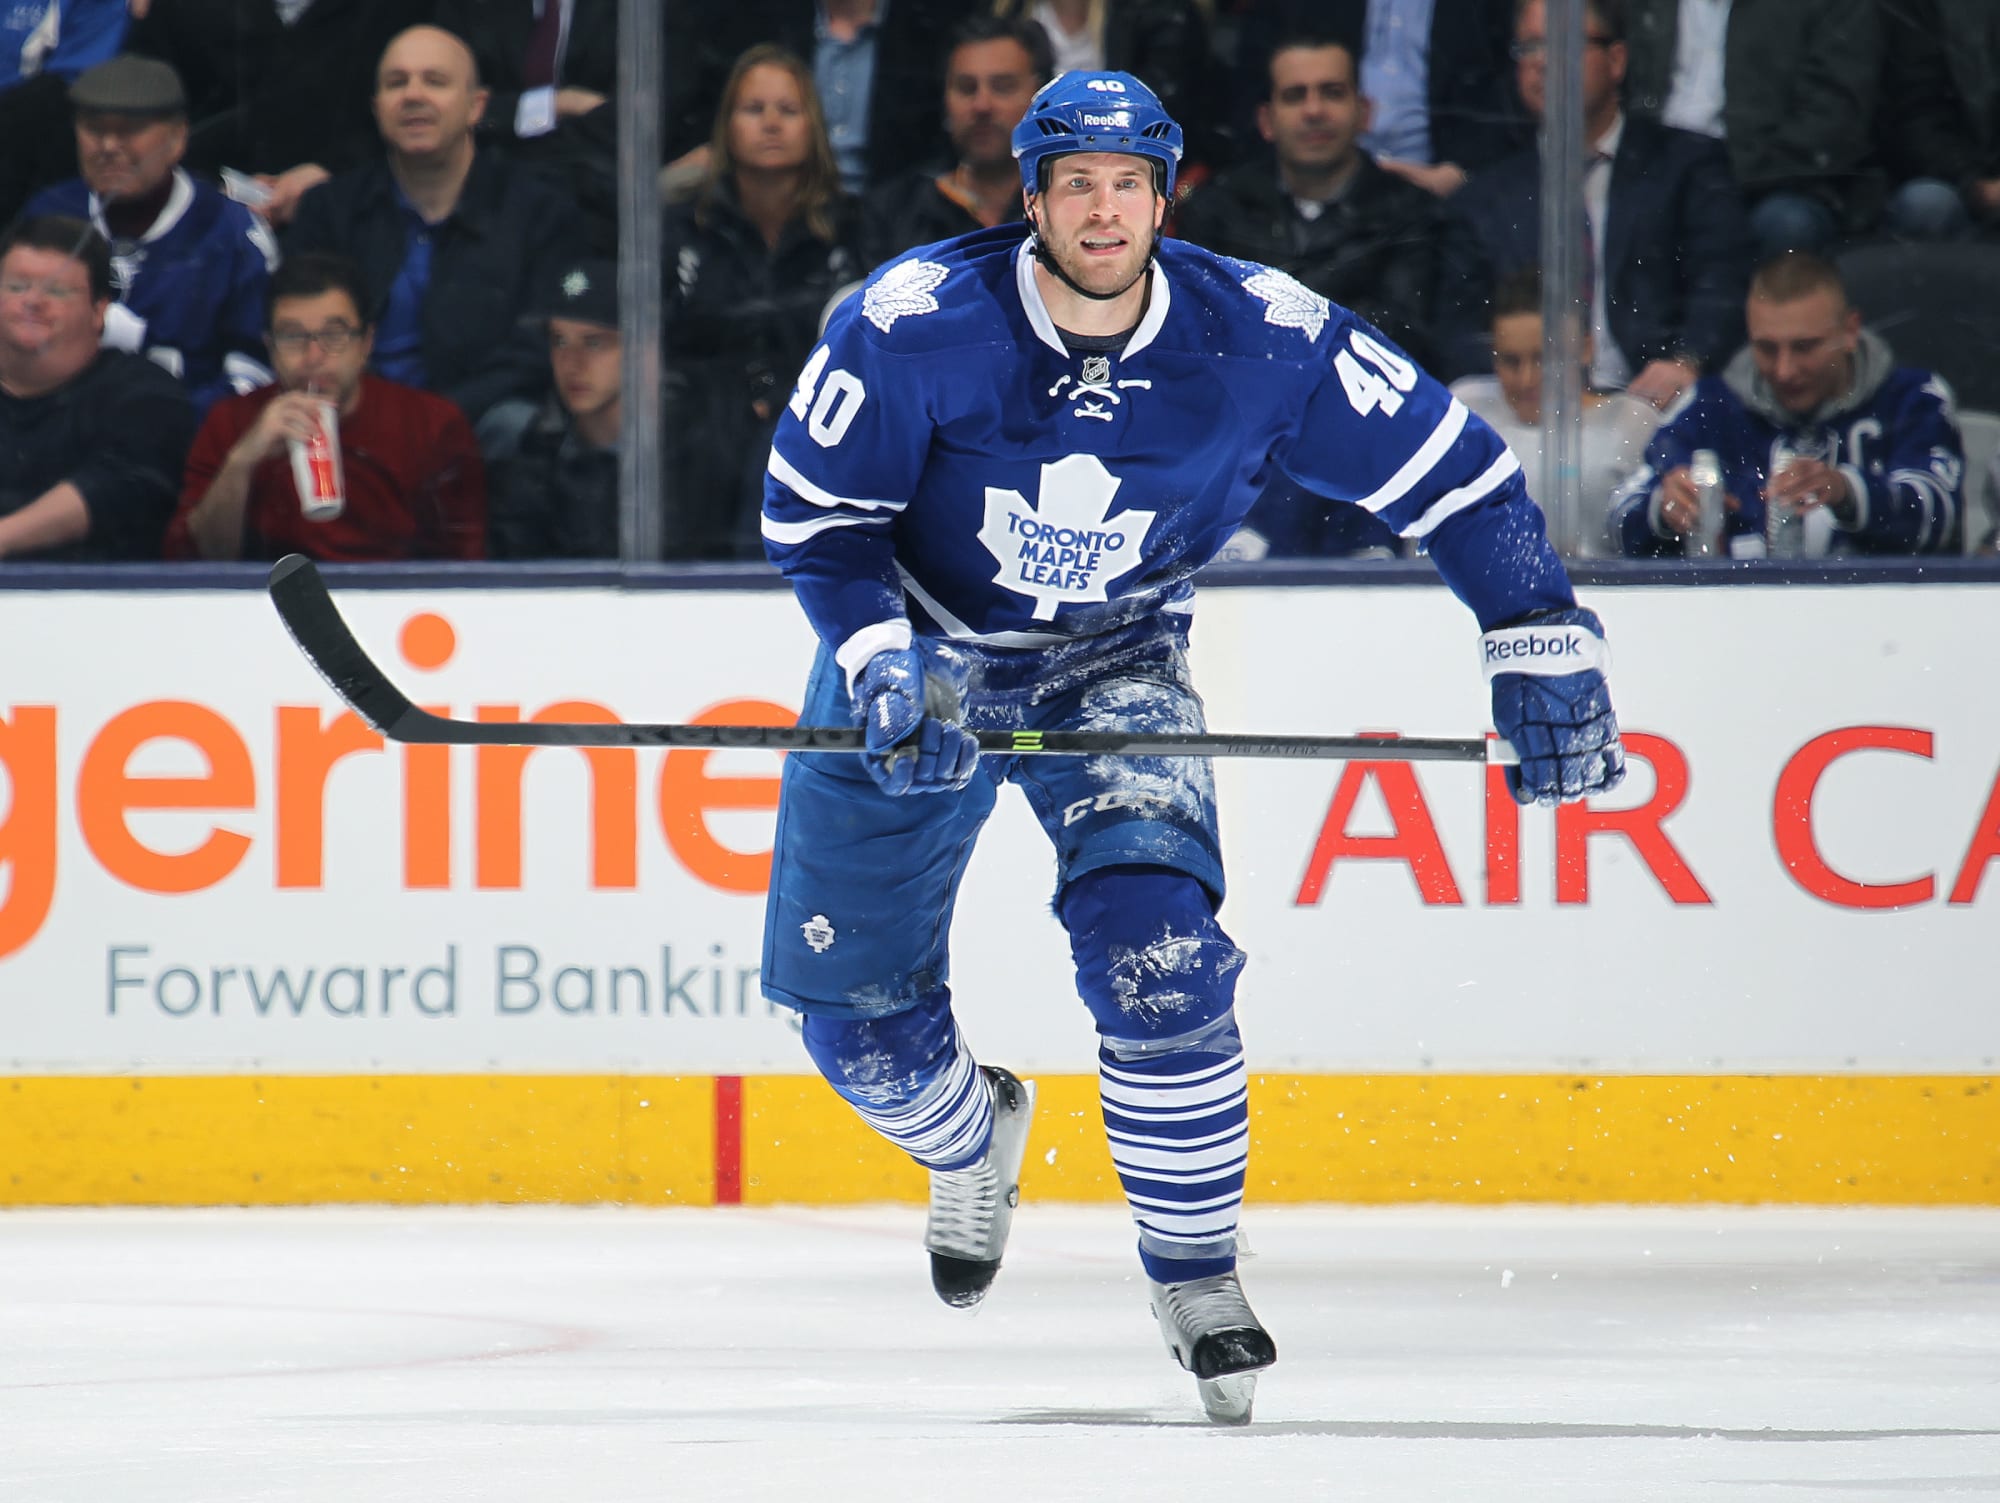 Toronto Maple Leafs on X: The @MapleLeafs announced today that